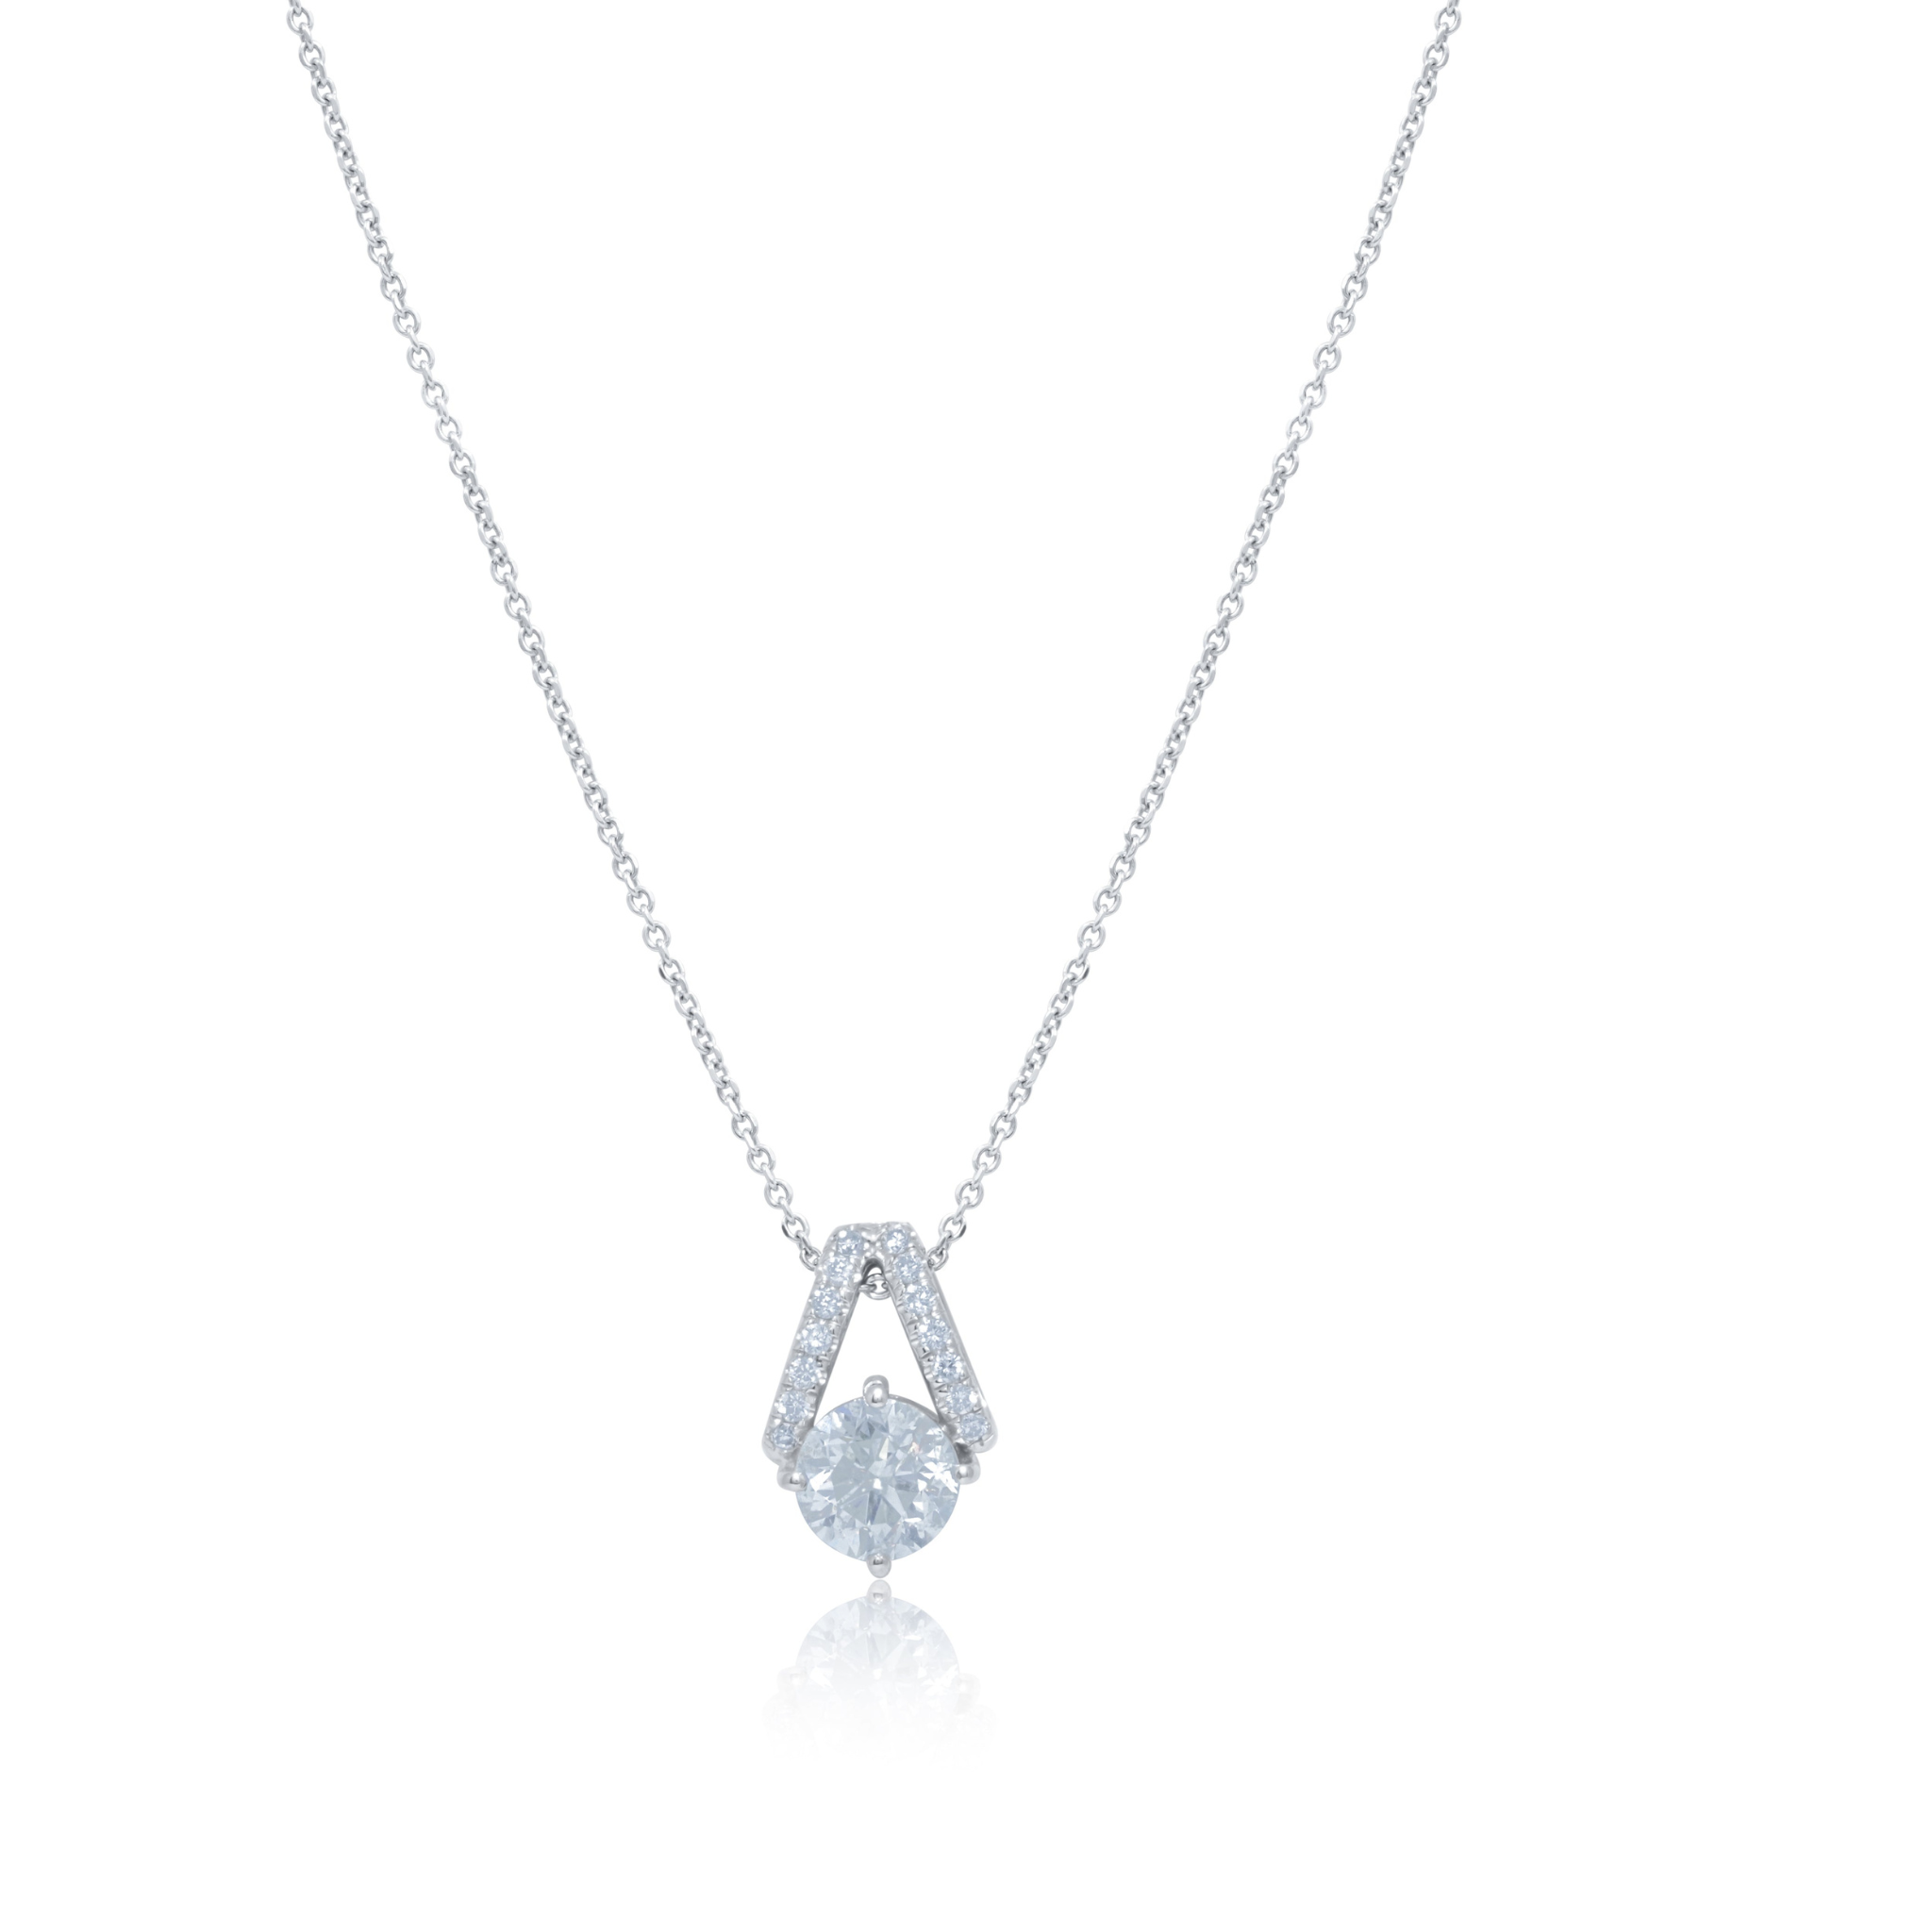 18kt White Gold Diamond Pendant with 1.22 Cts.jpg